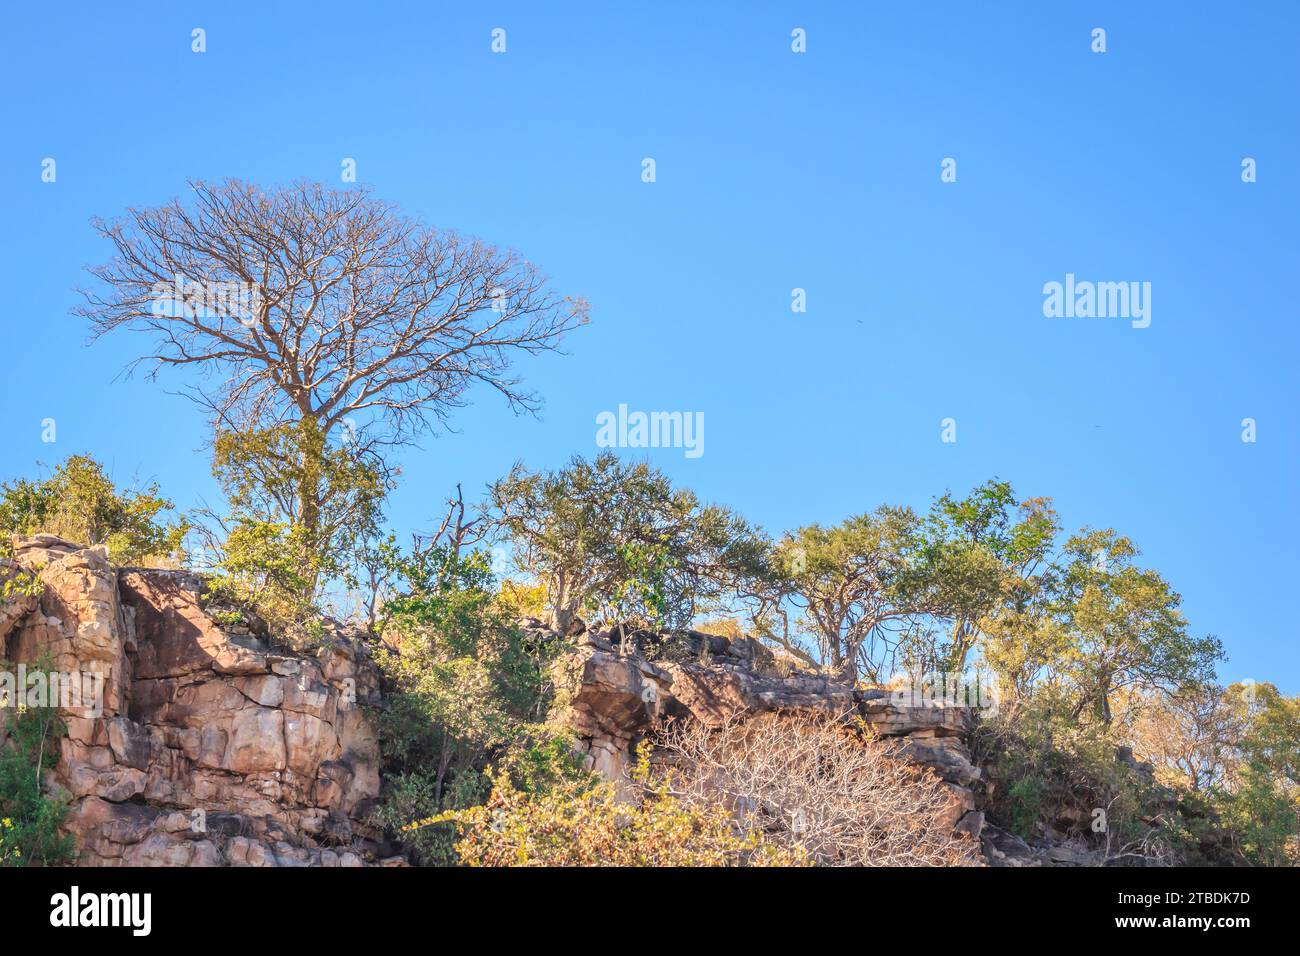 Travelling through a dry bushveld landscape covered in mopani and acacia trees at sunset, Kruger National Park, South Africa Stock Photo